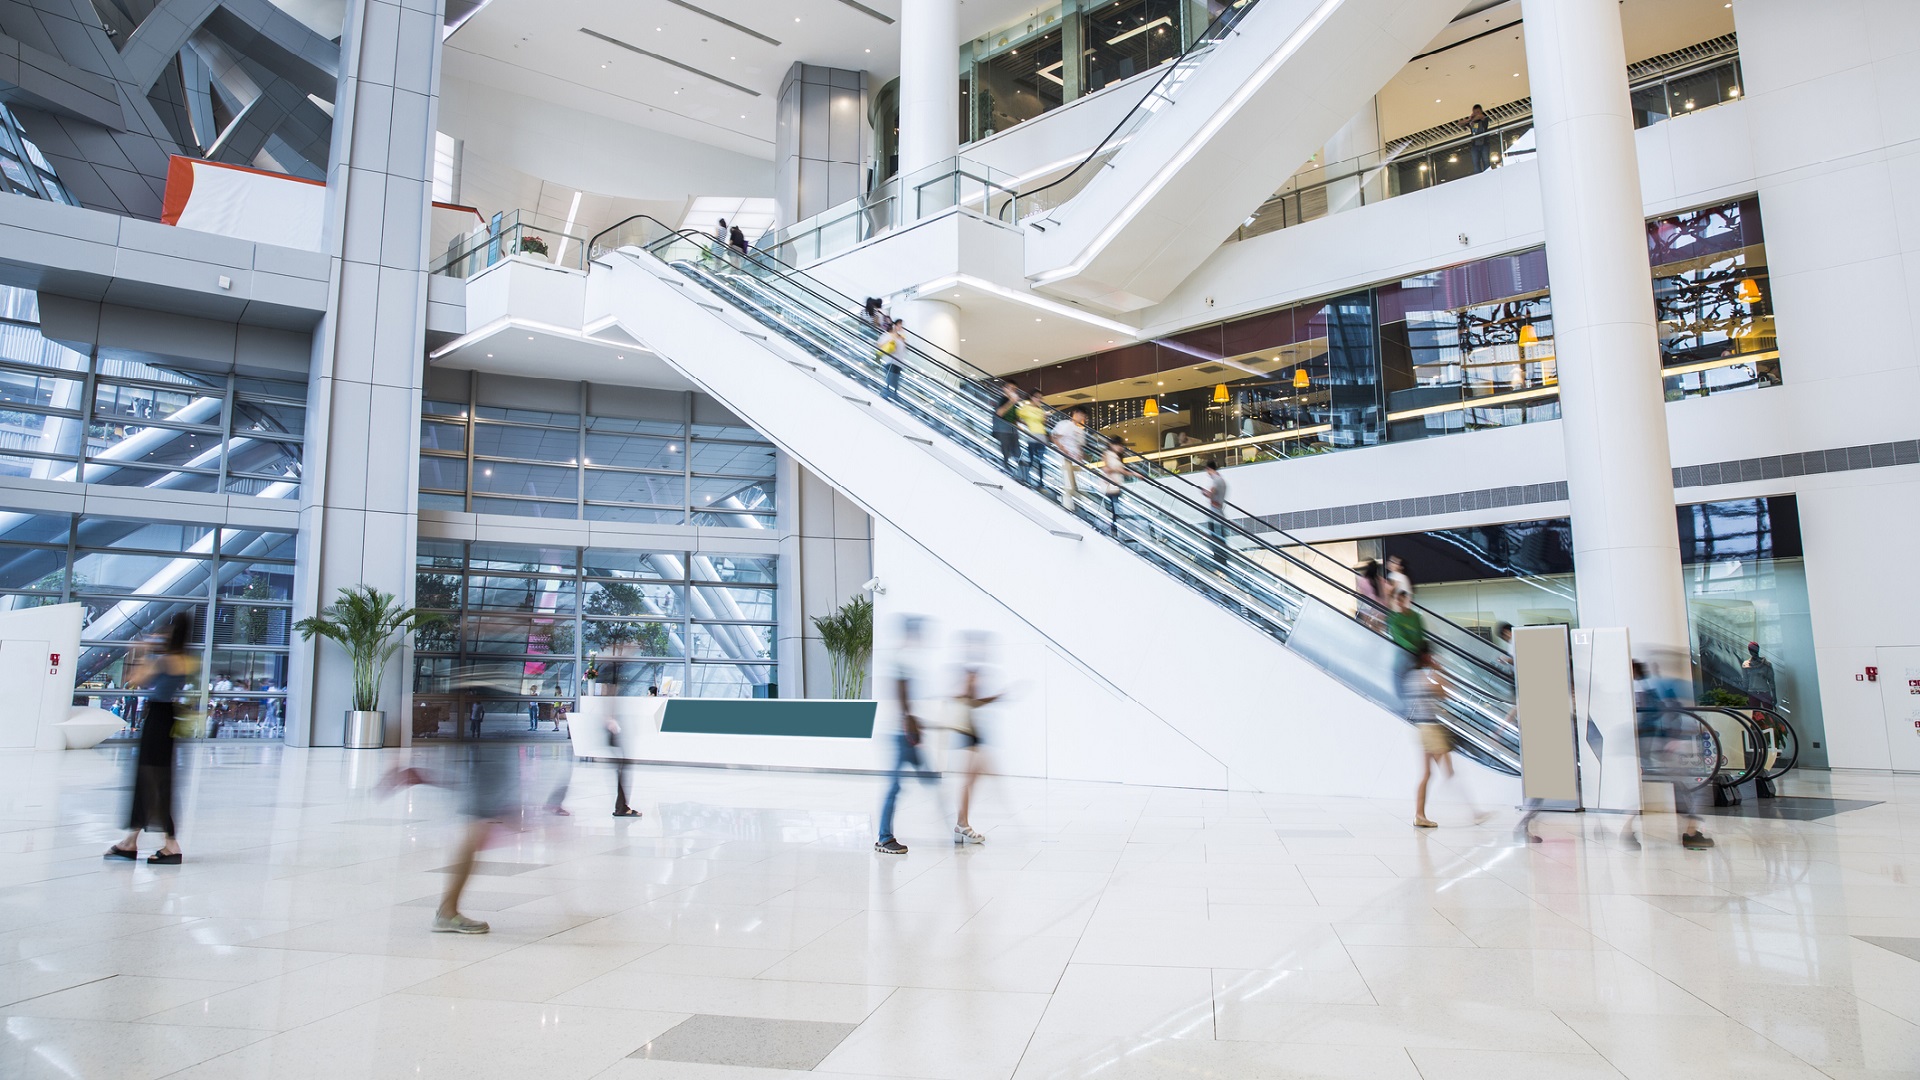 Shopping Malls Are Evolving, But They're Not There Yet 